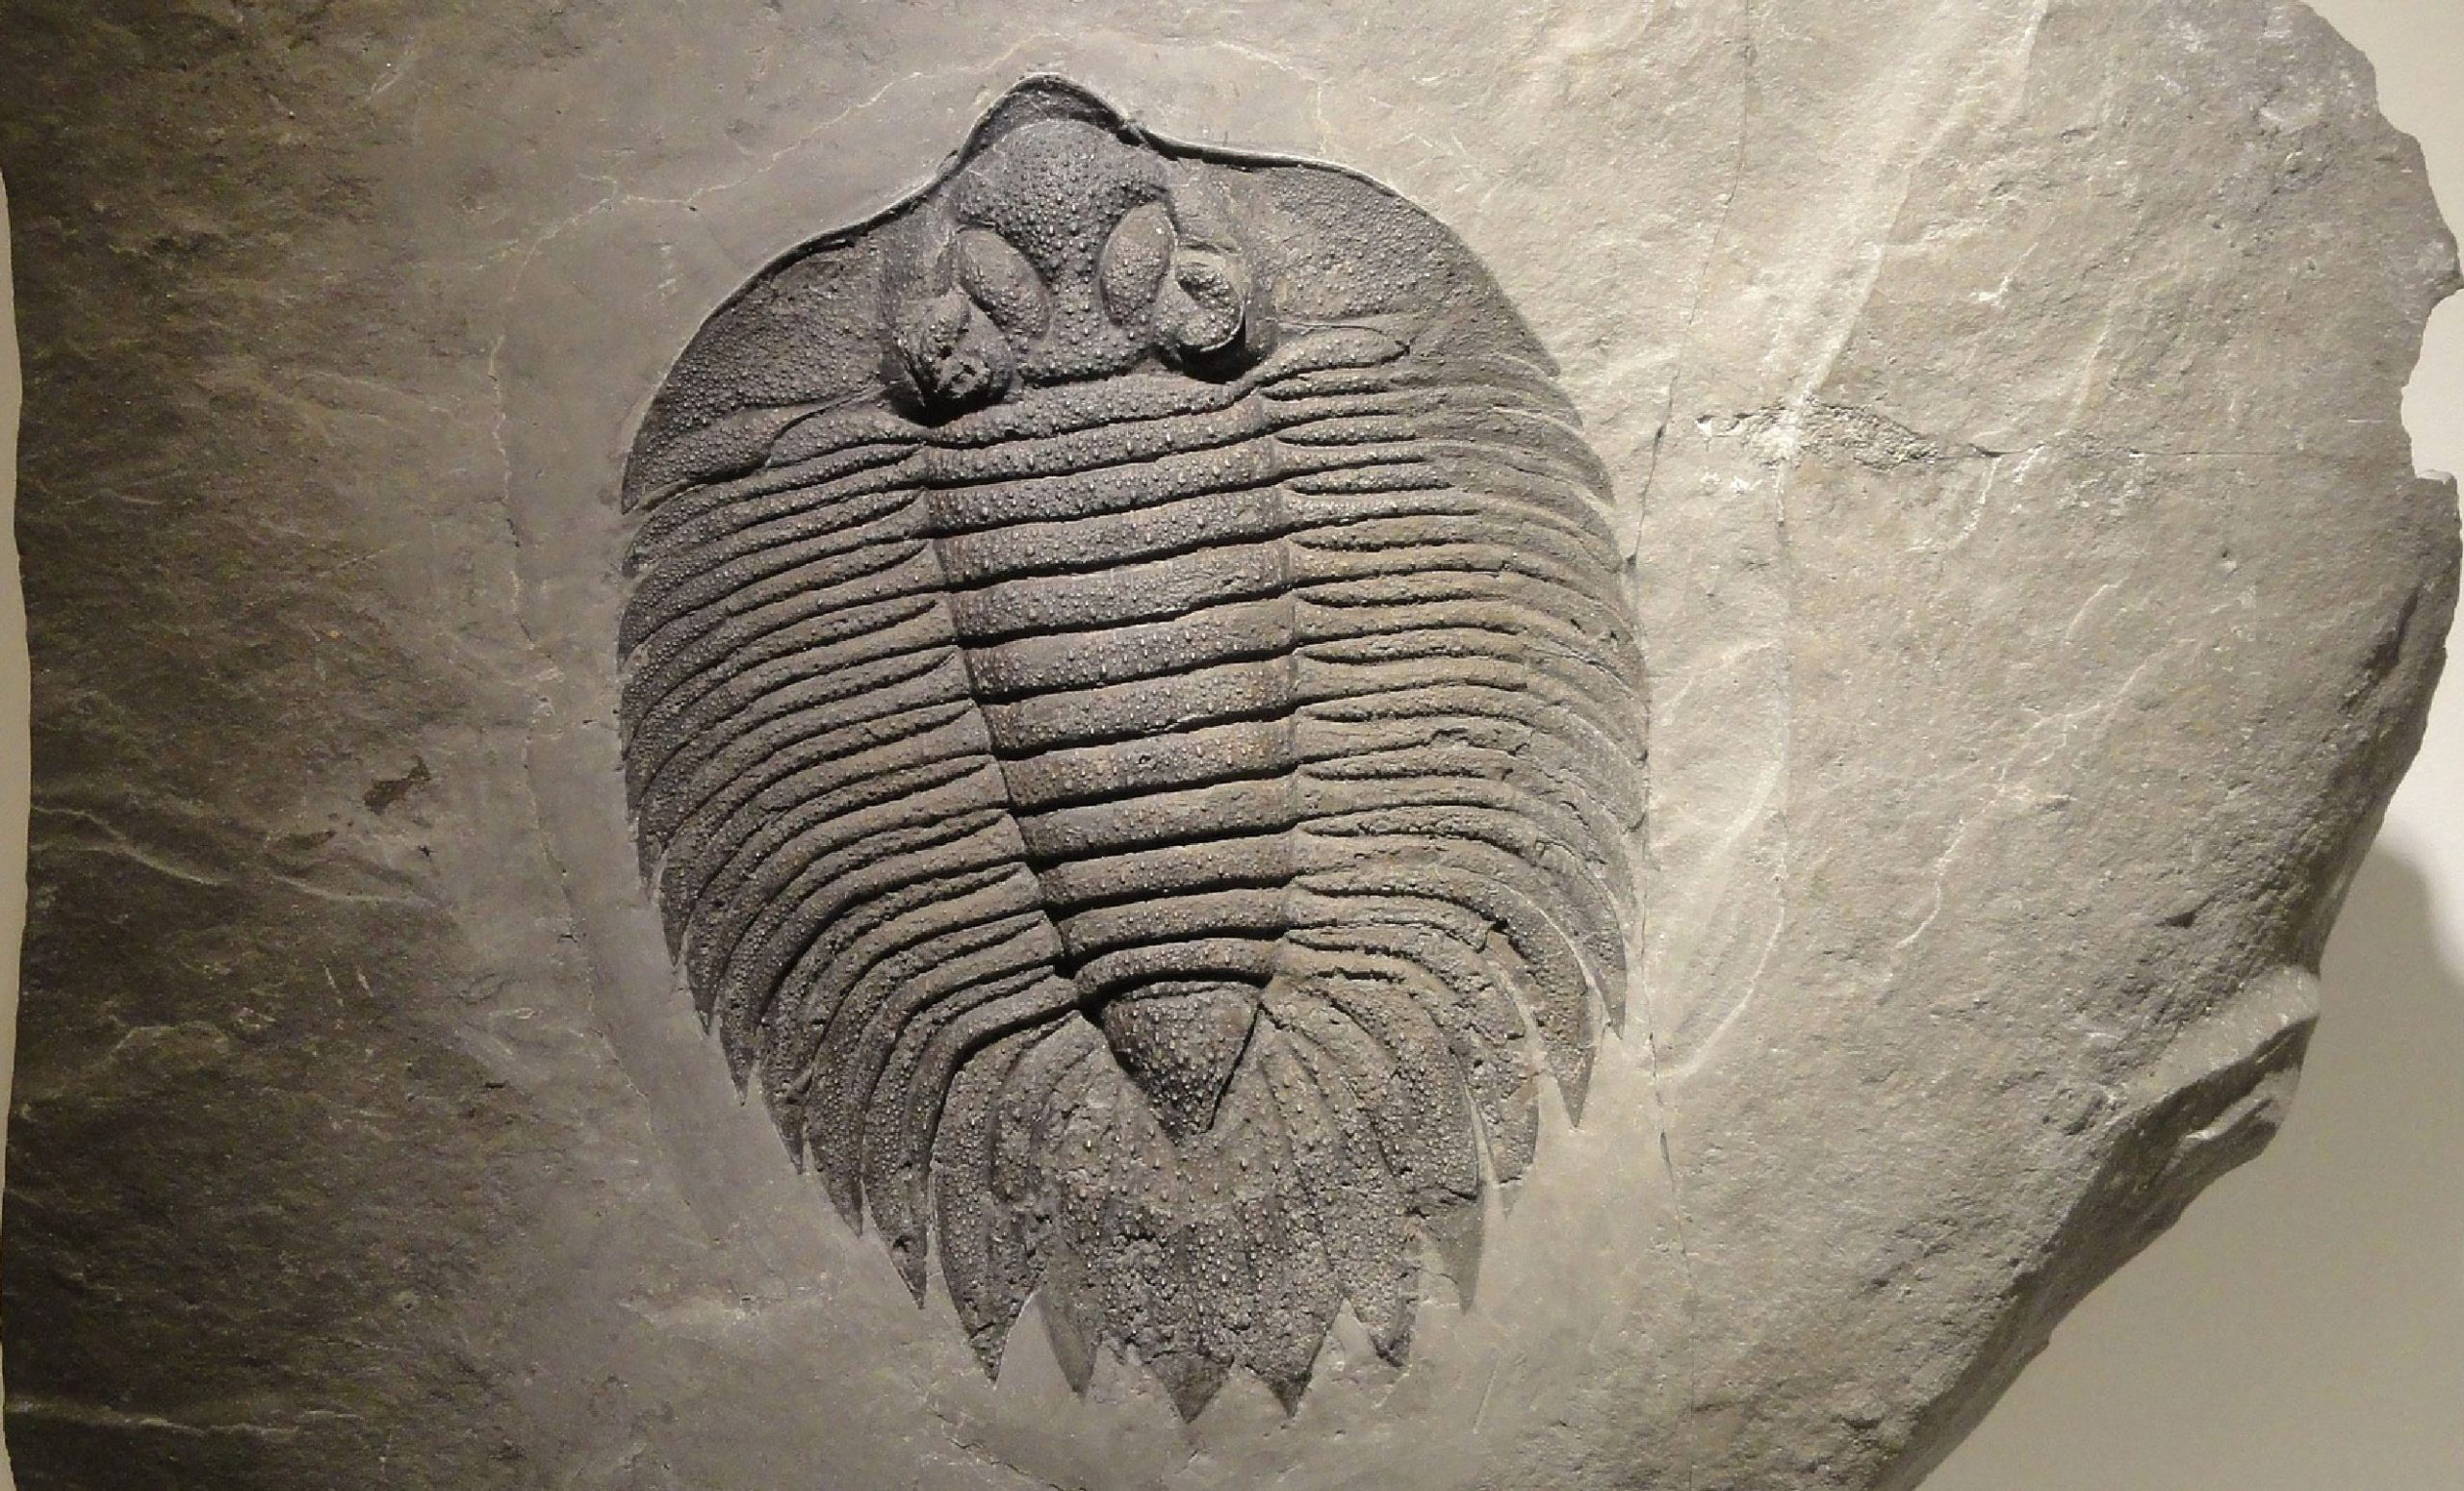 A photograph of a fossil in a stone.